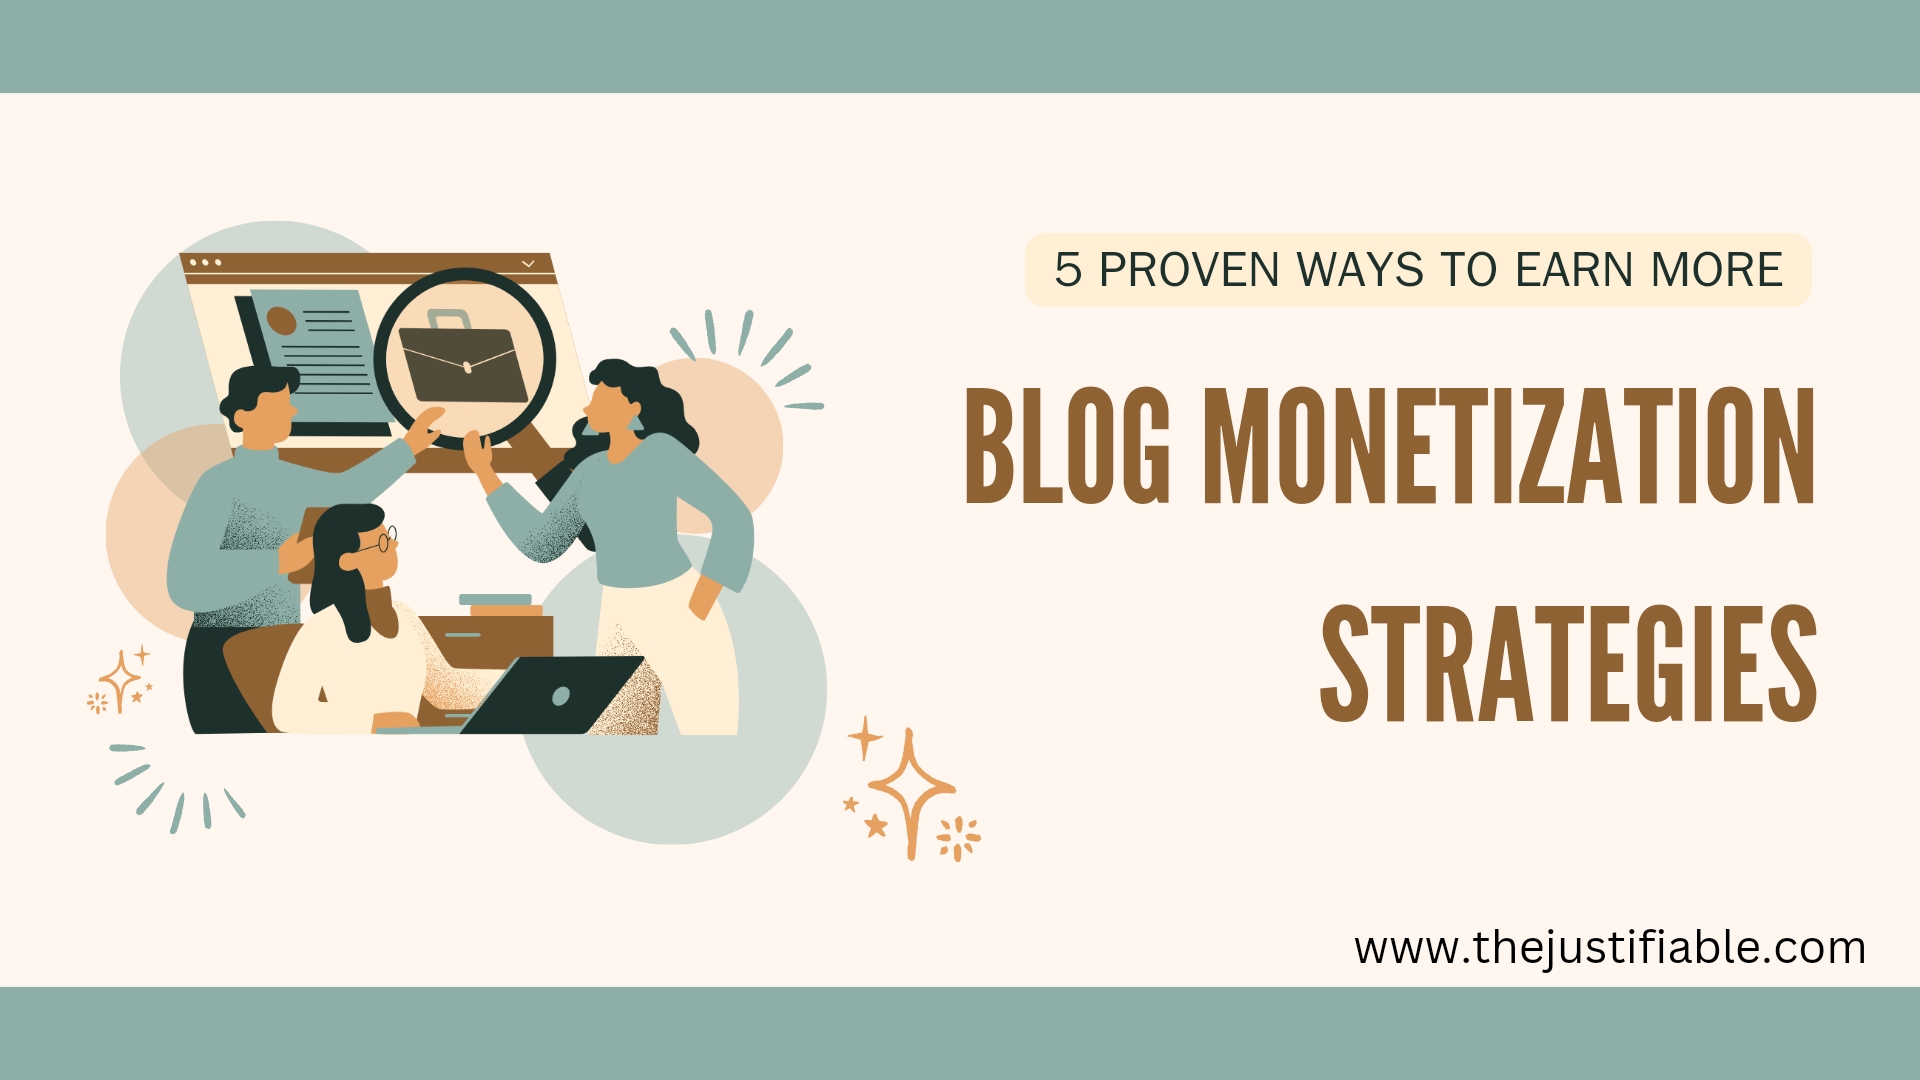 The image is a graphic related to blog monetization strategies.